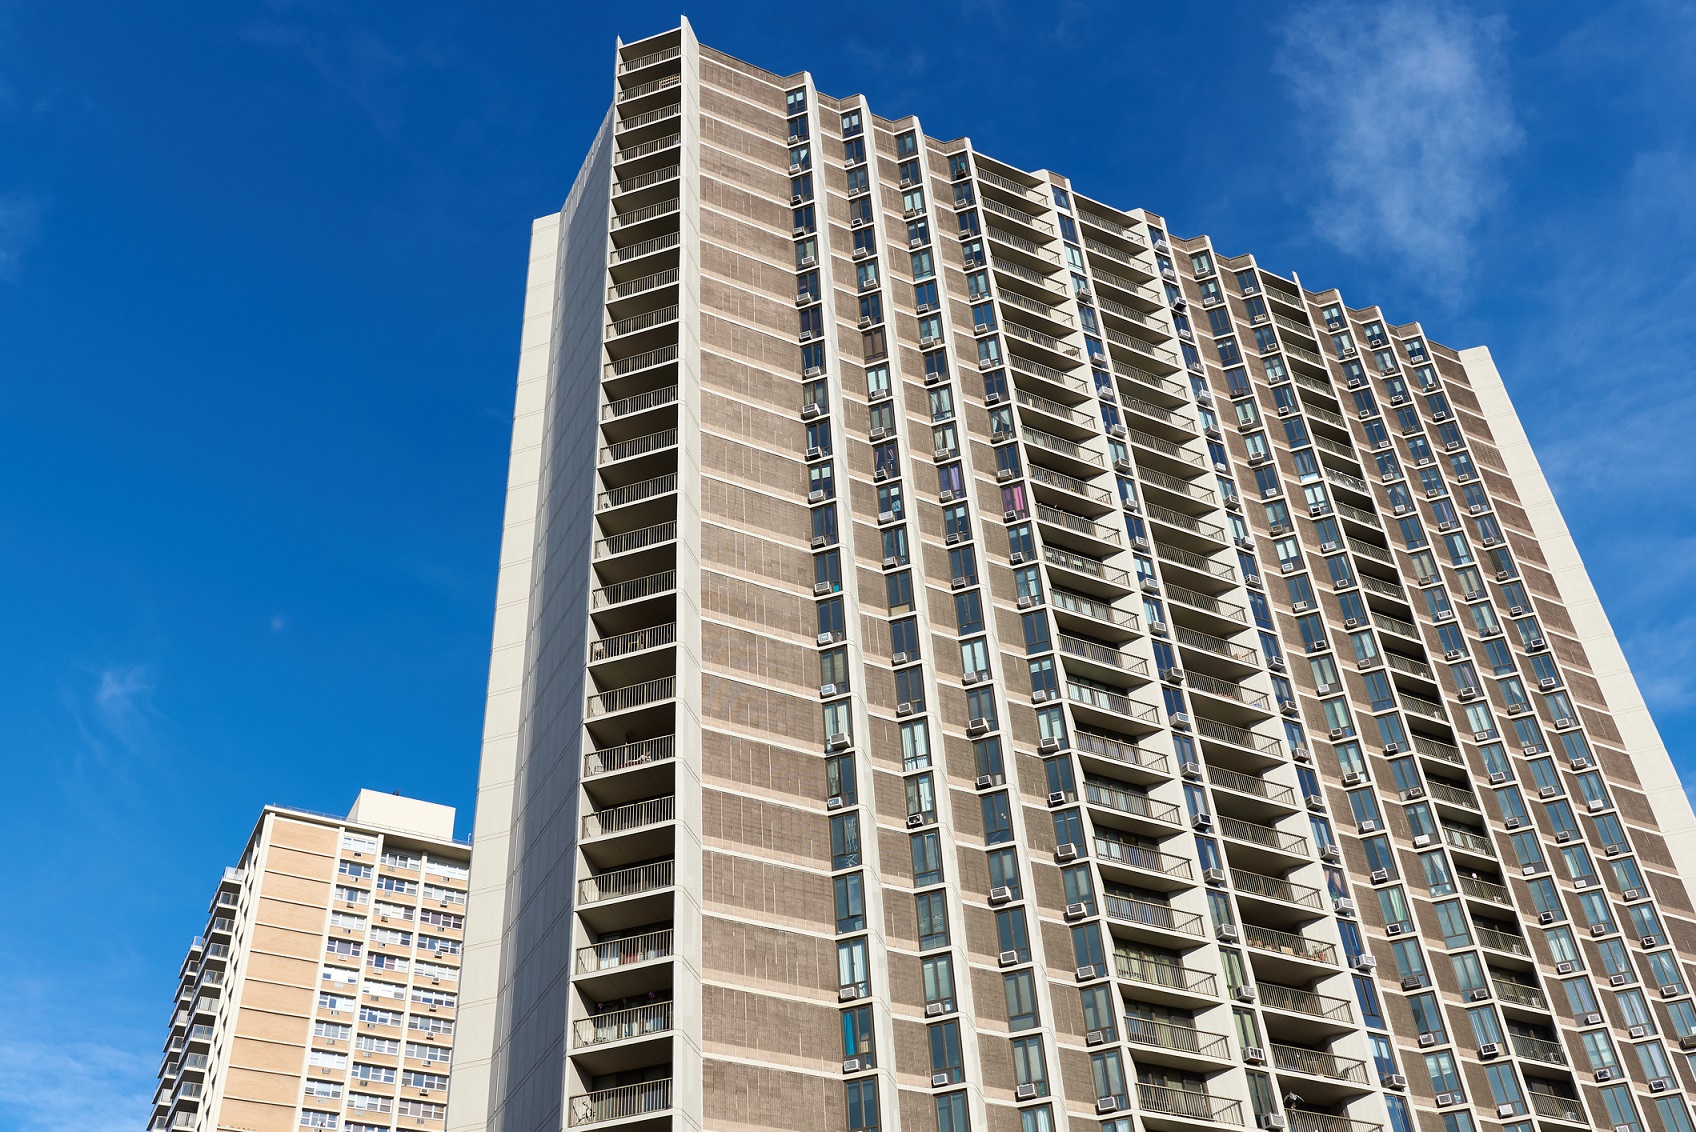 New Condo & Co-op Mortgage Standards Emerge After Surfside Collapse